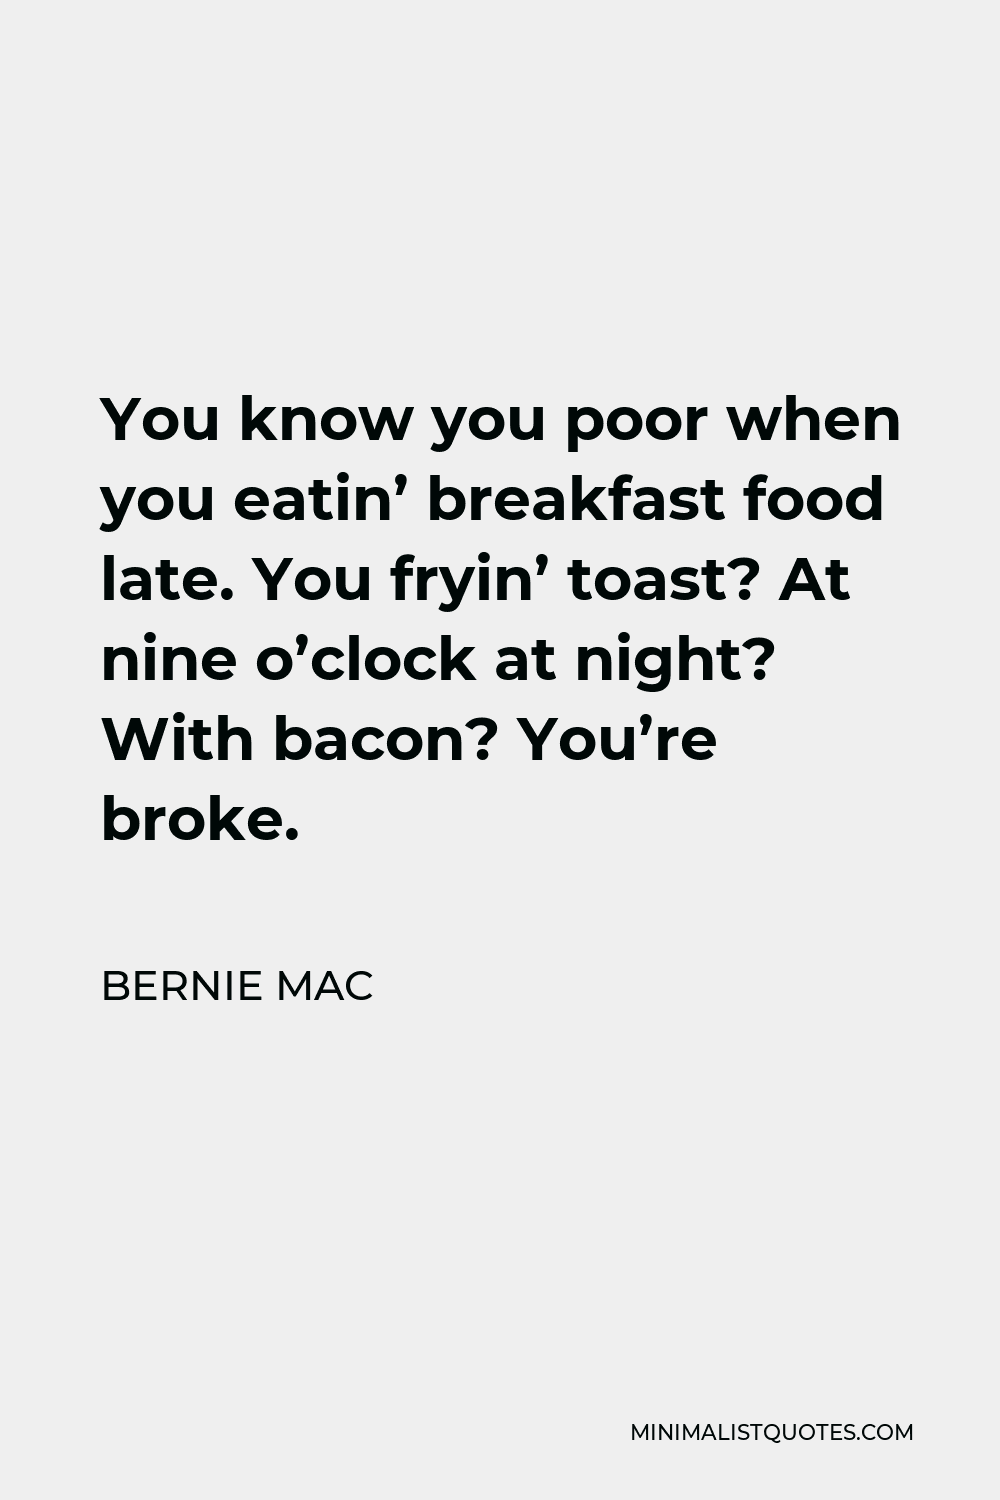 Bernie Mac Quote - You know you poor when you eatin’ breakfast food late. You fryin’ toast? At nine o’clock at night? With bacon? You’re broke.